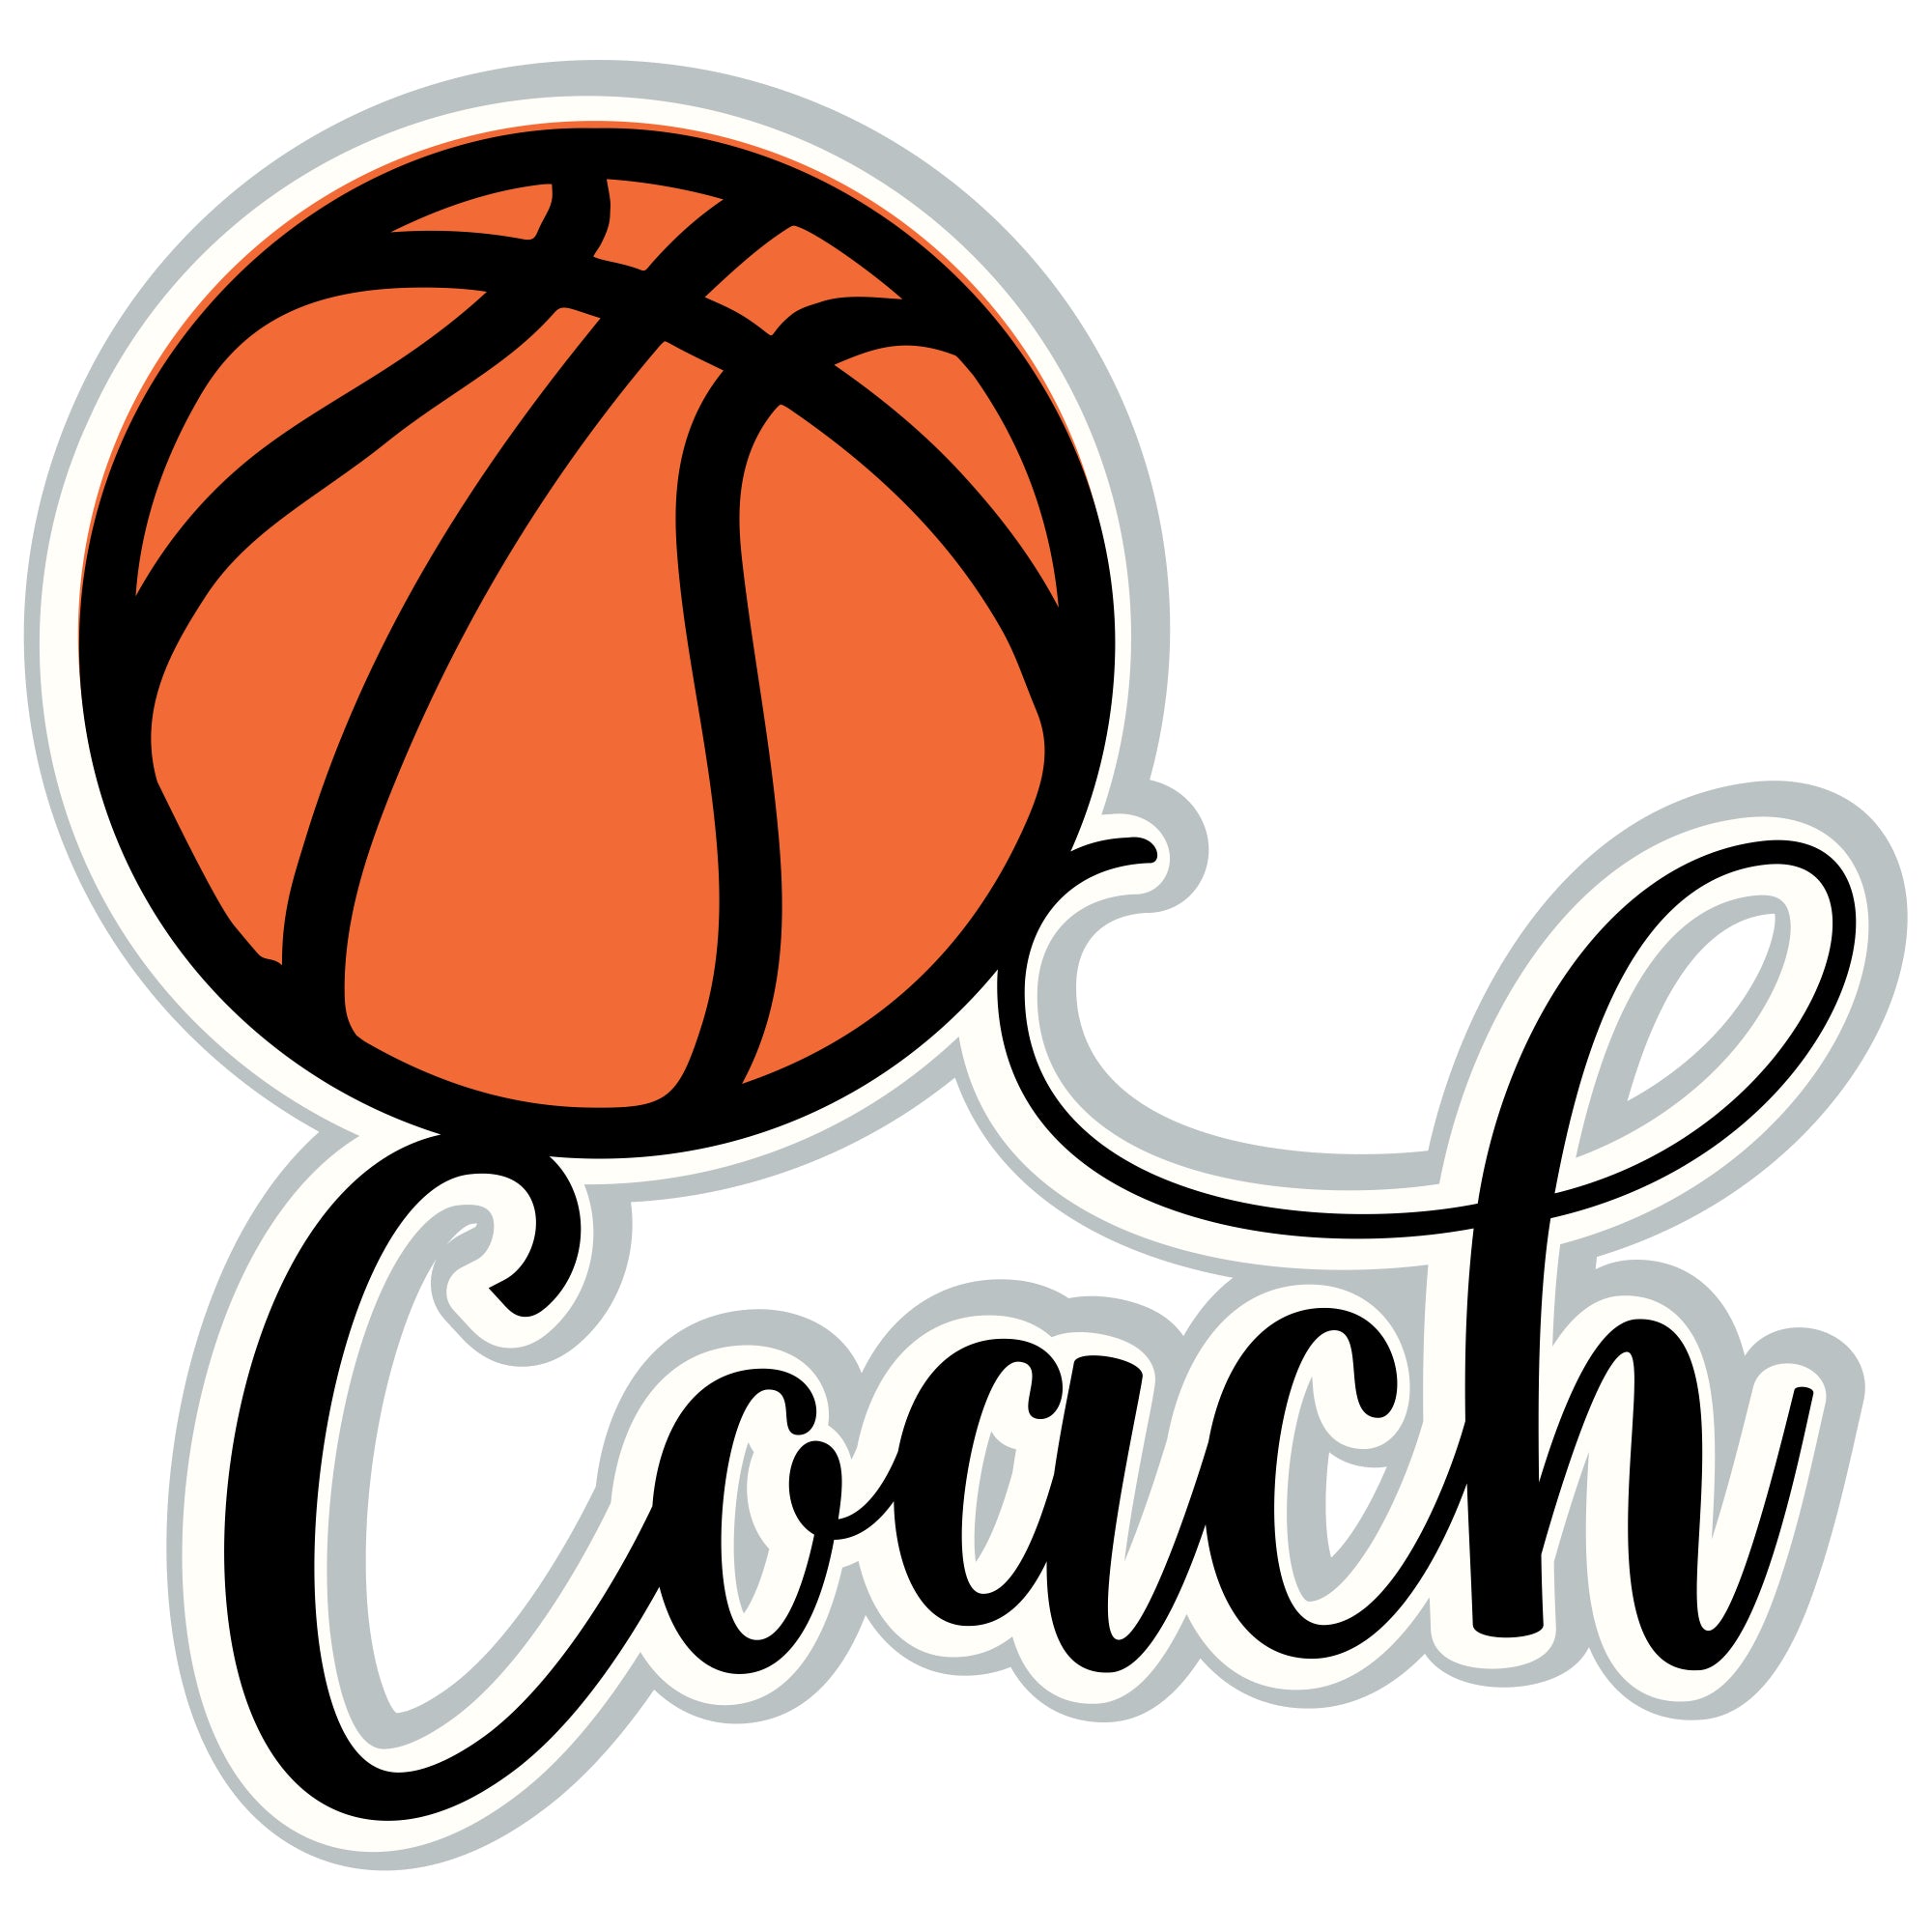 Sports Collection Basketball Coach 6.5 x 6.25 Fully-Assembled Laser Cut by SSC Laser Designs